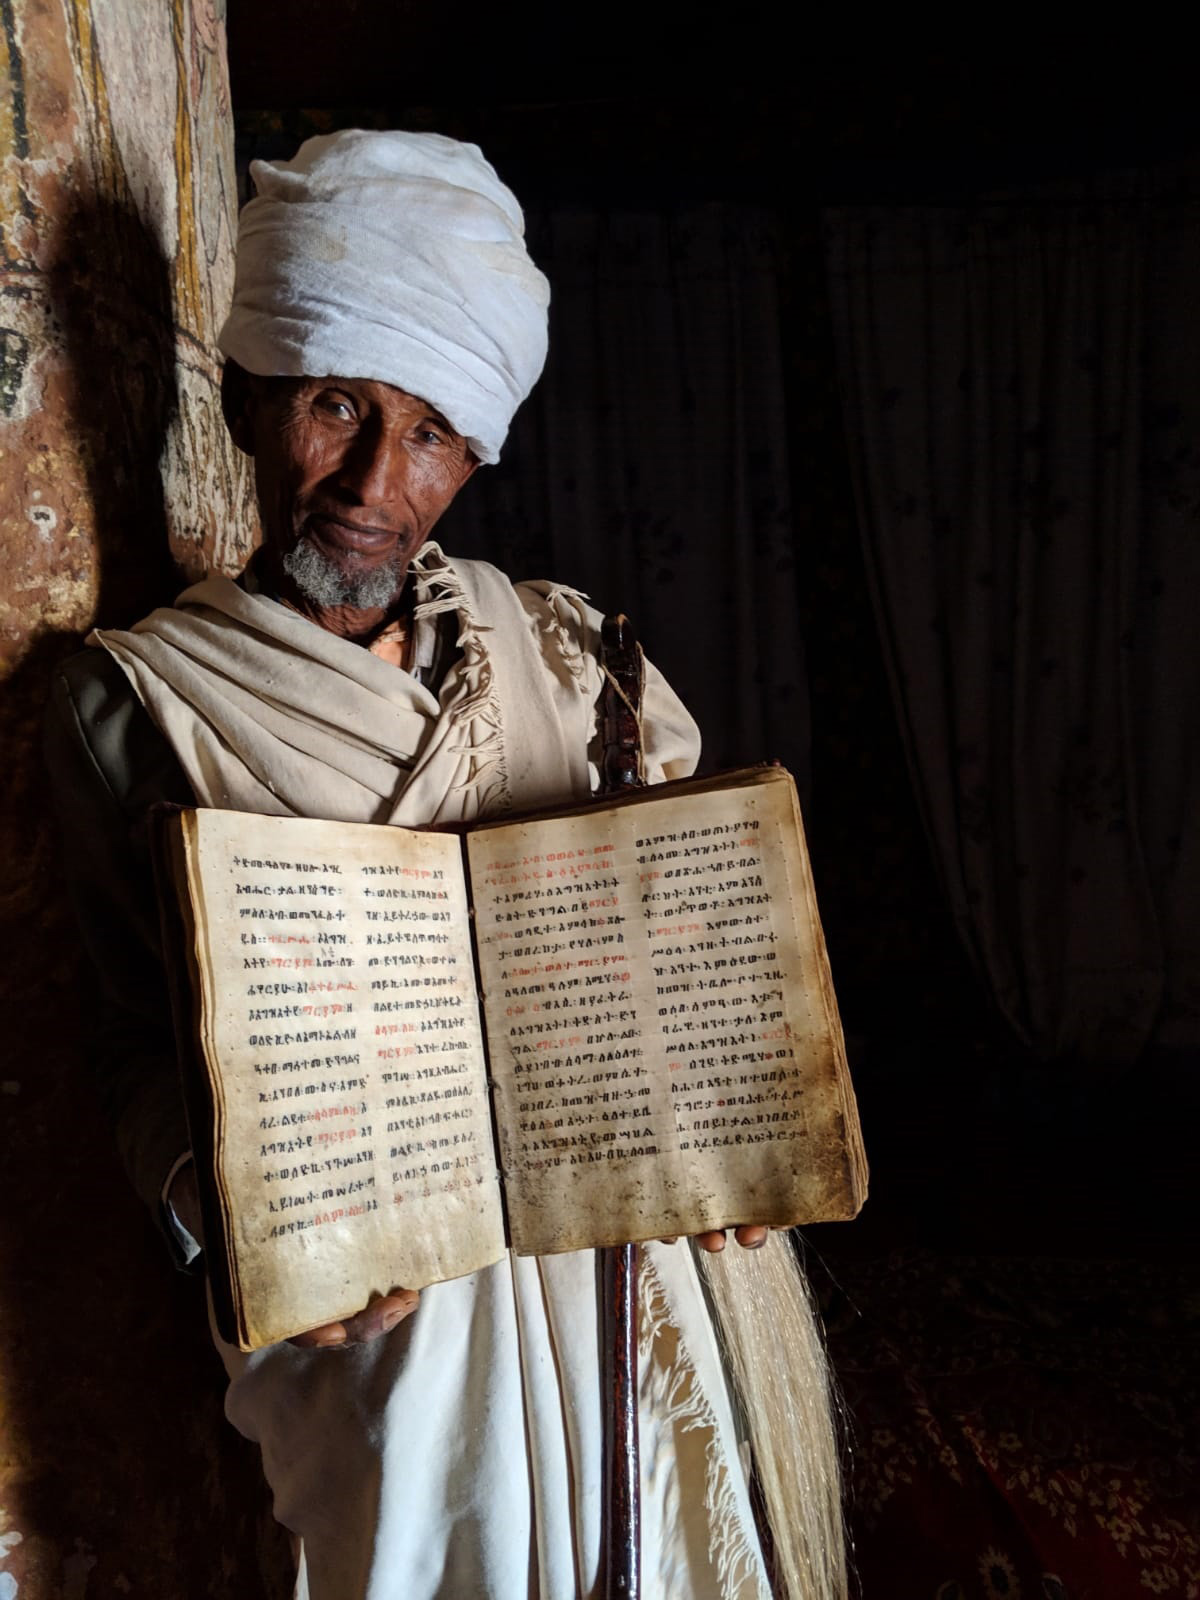 A priest holds the Bible in the Abuna Yemata Guh church, 2,580 metres above ground level. Its pages are made out of goat skin inked with Amharic letters, where the names of holy figures are written in red – Tigray Region, Ethiopia © Lukas Dennert 